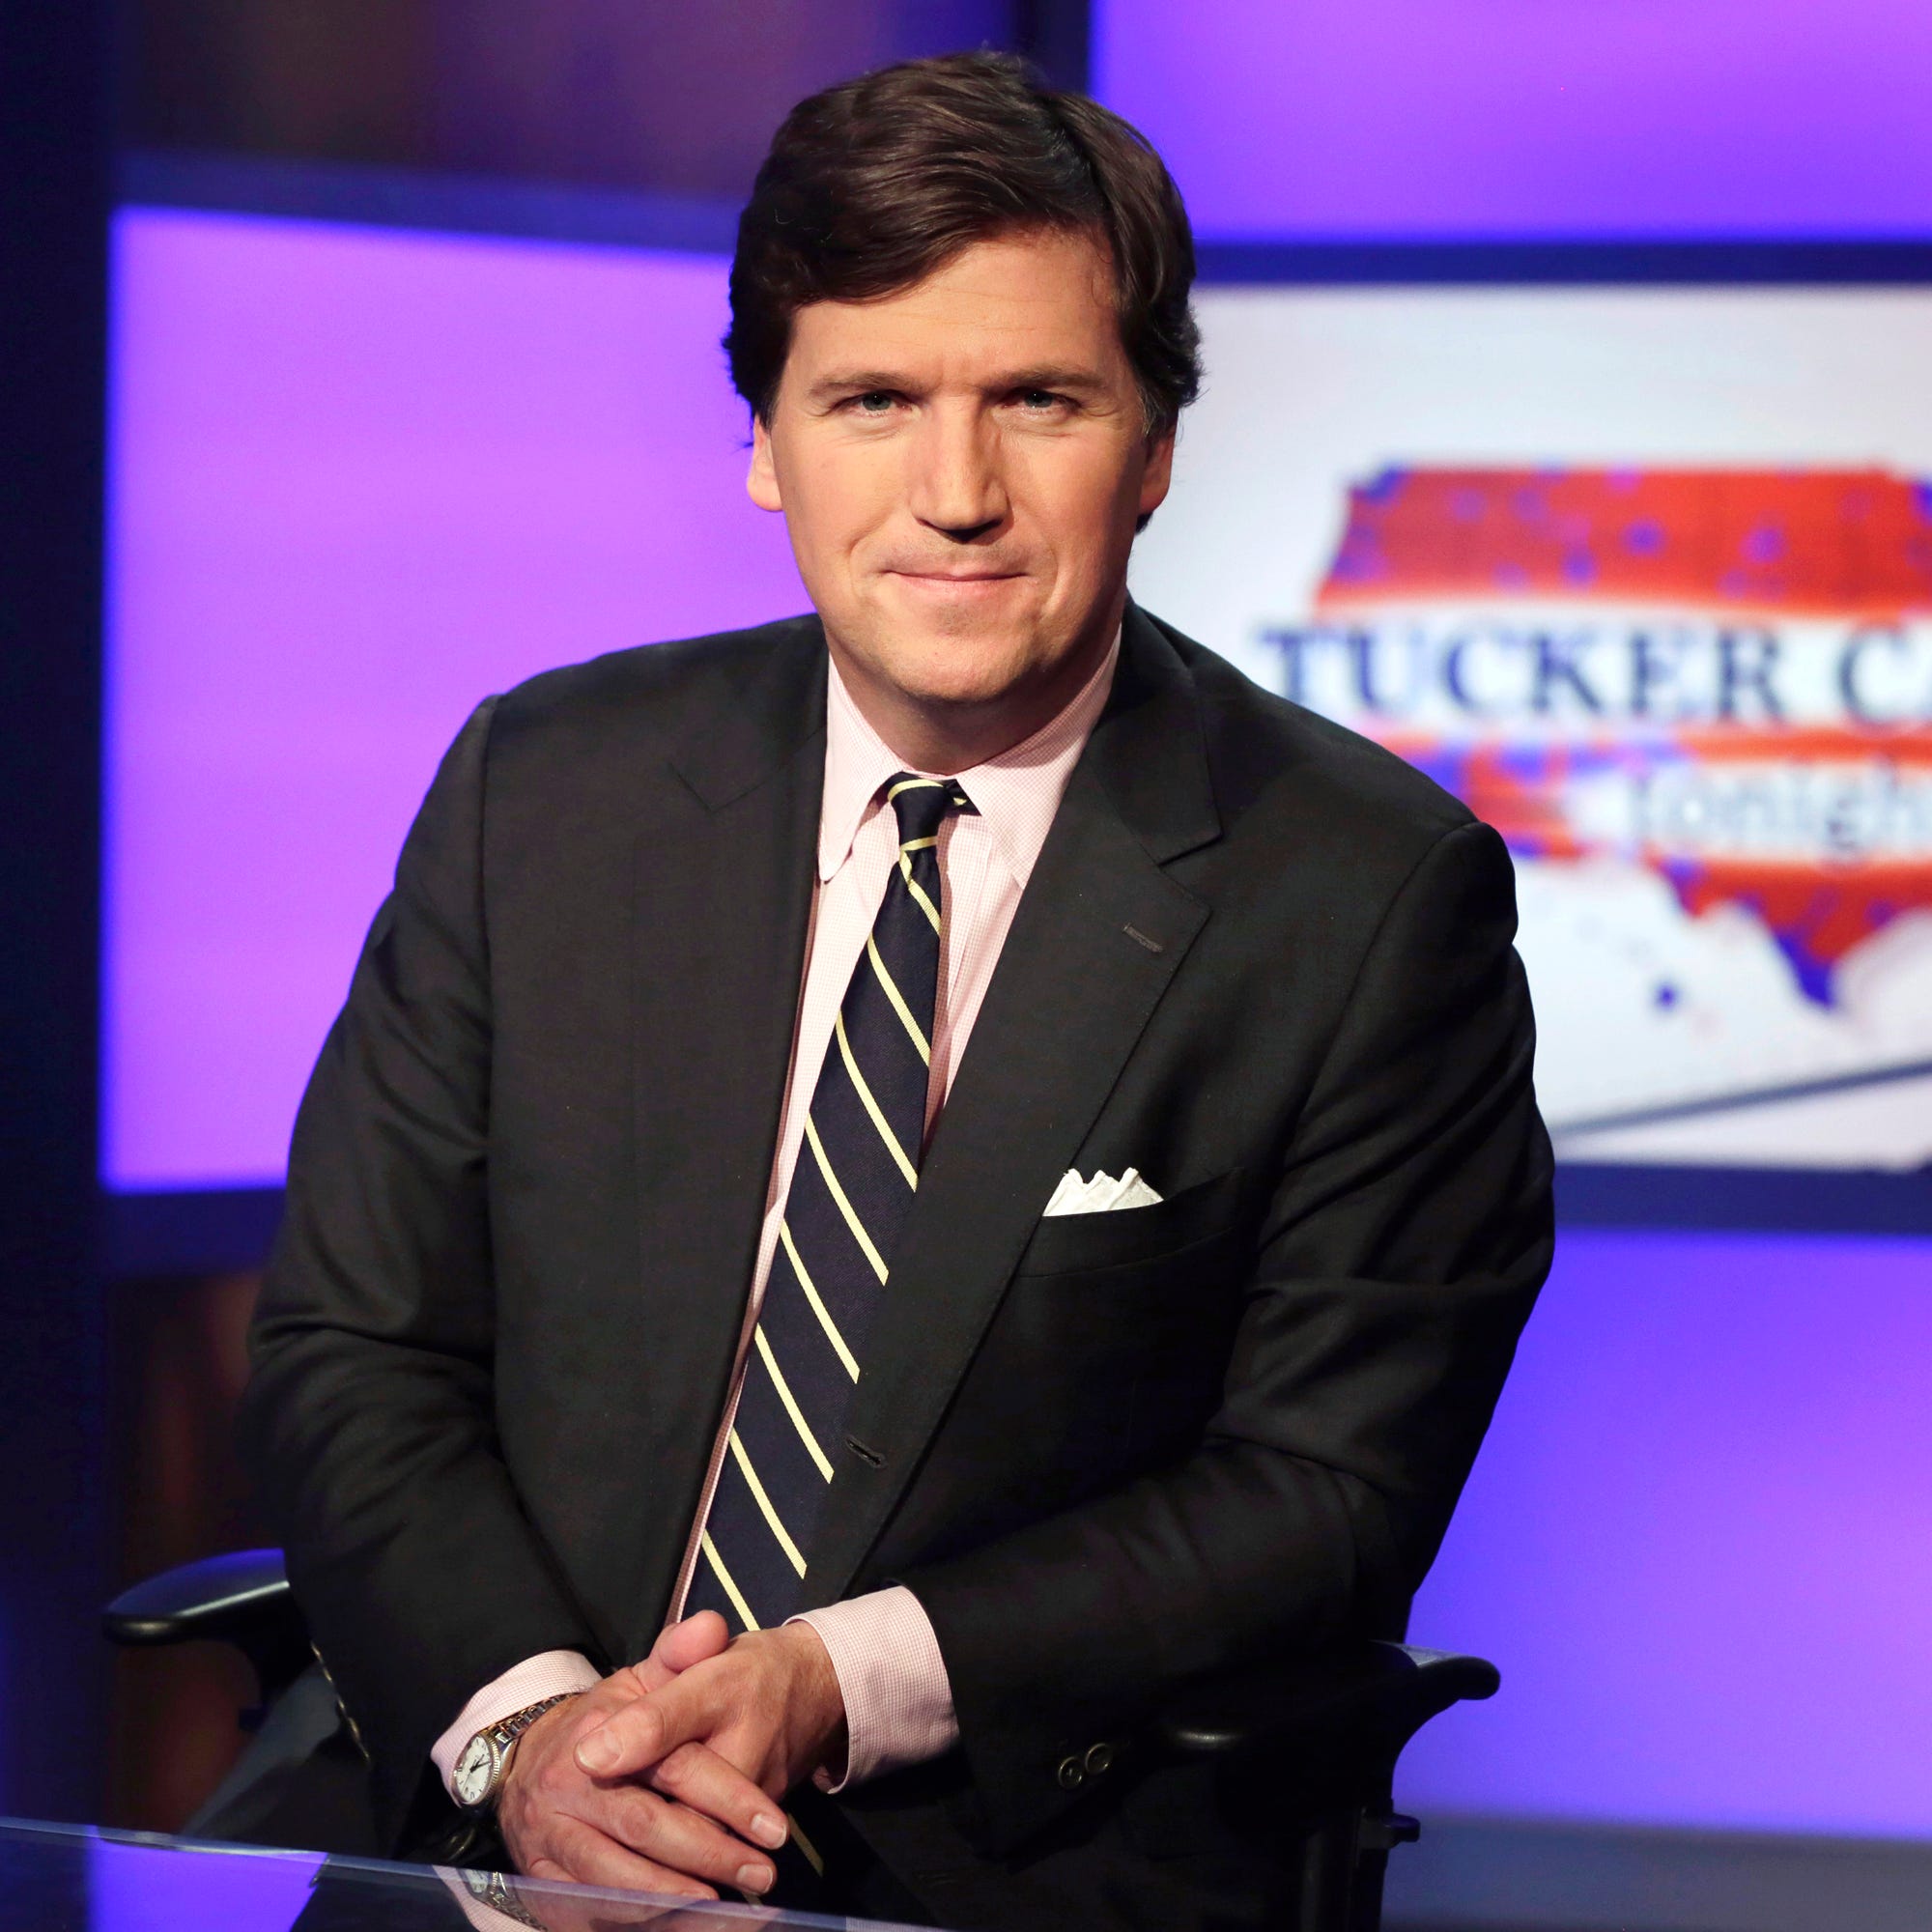 Tucker Carlson, host of "Tucker Carlson Tonight," poses for photos in a Fox News Channel studio on March 2, 2017, in New York.